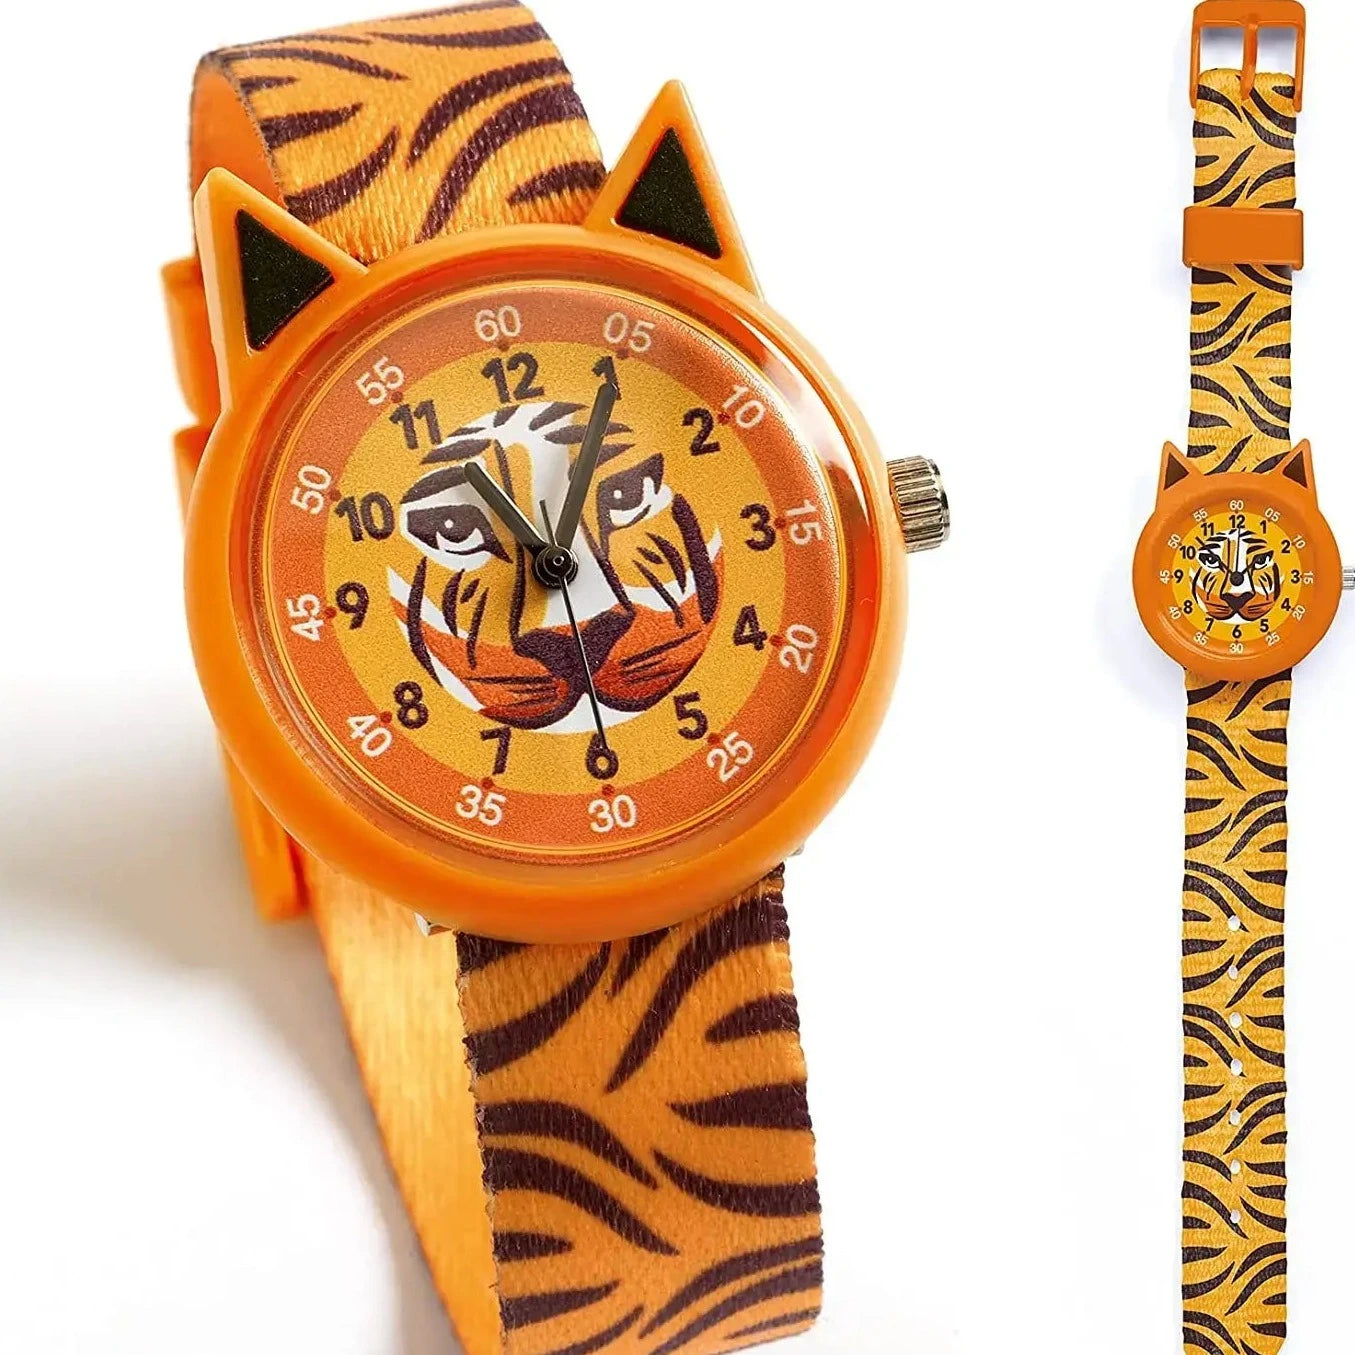 Ticlock Tiger Children's Learning Educational Watch